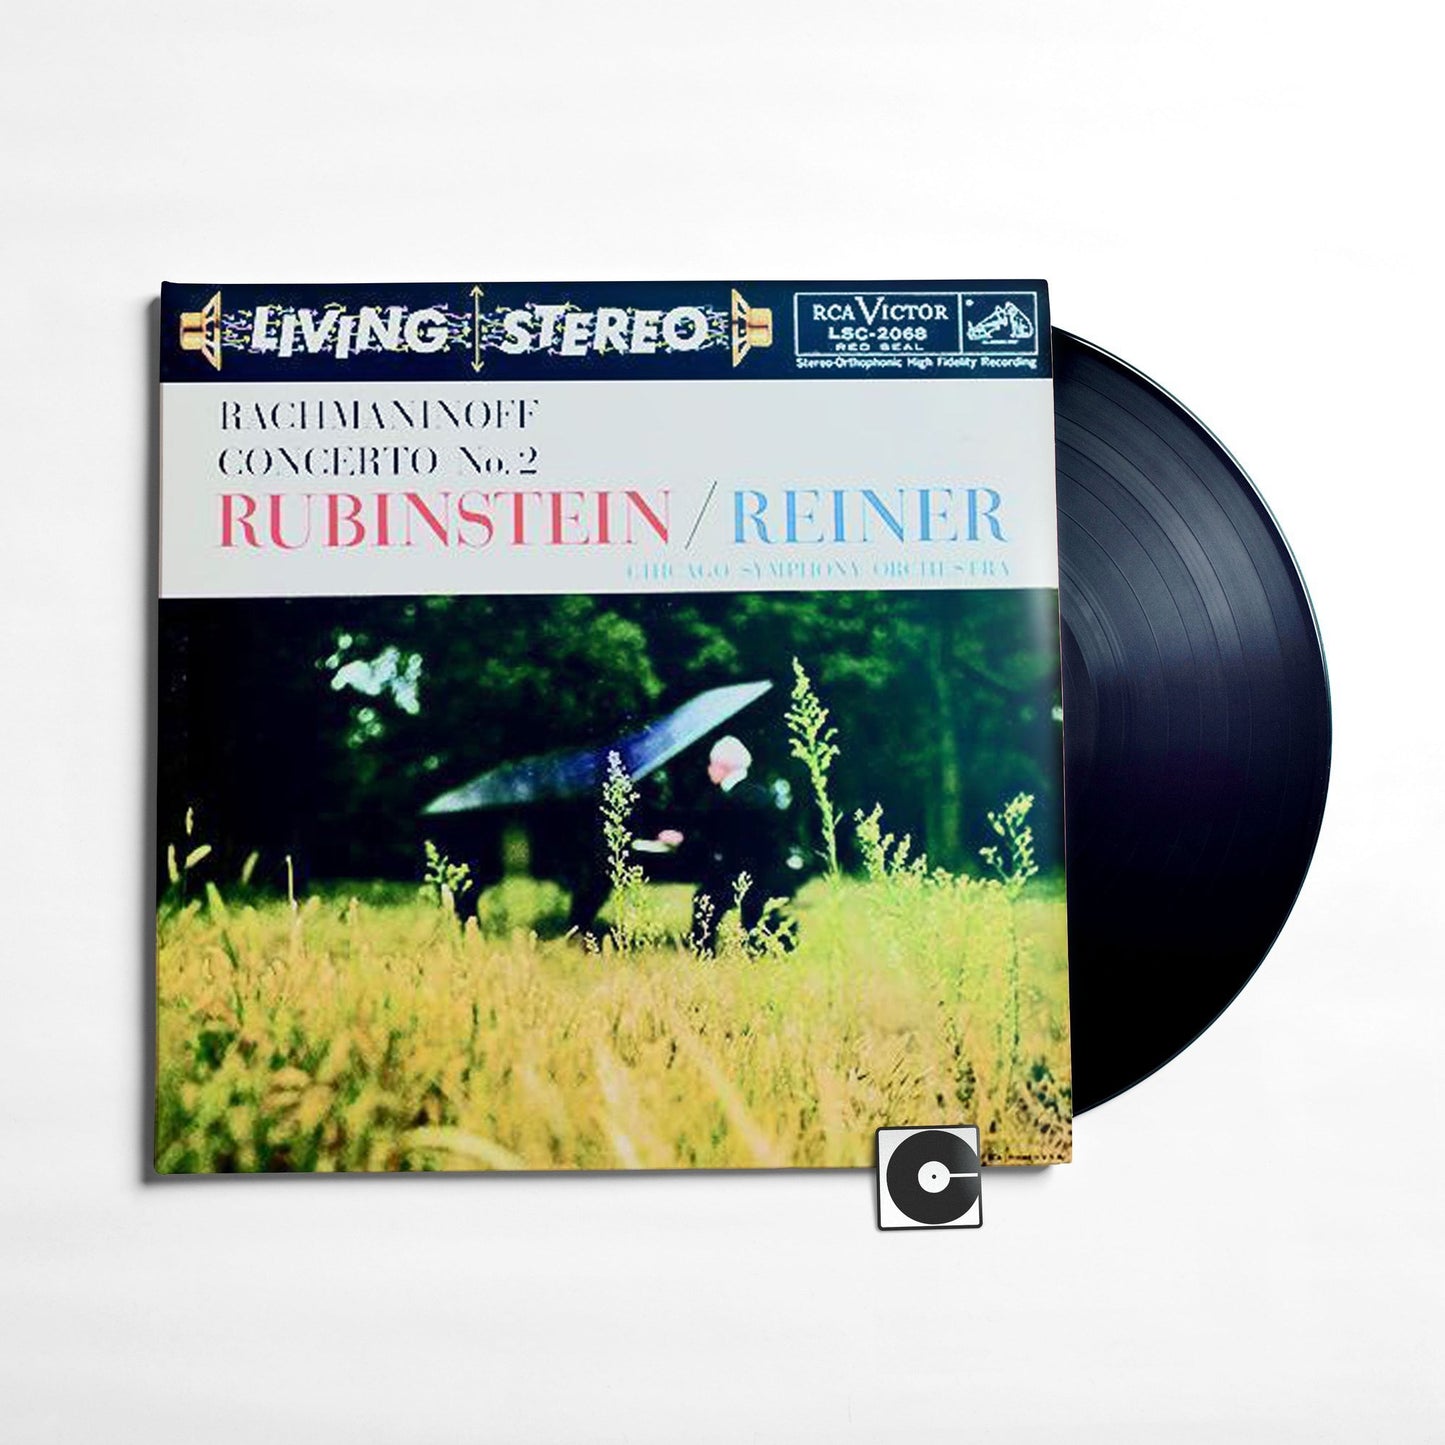 Rubinstein And Reiner, Chicago Symphony Orchestra - "Rachmaninoff: Concerto No. 2" Analogue Productions